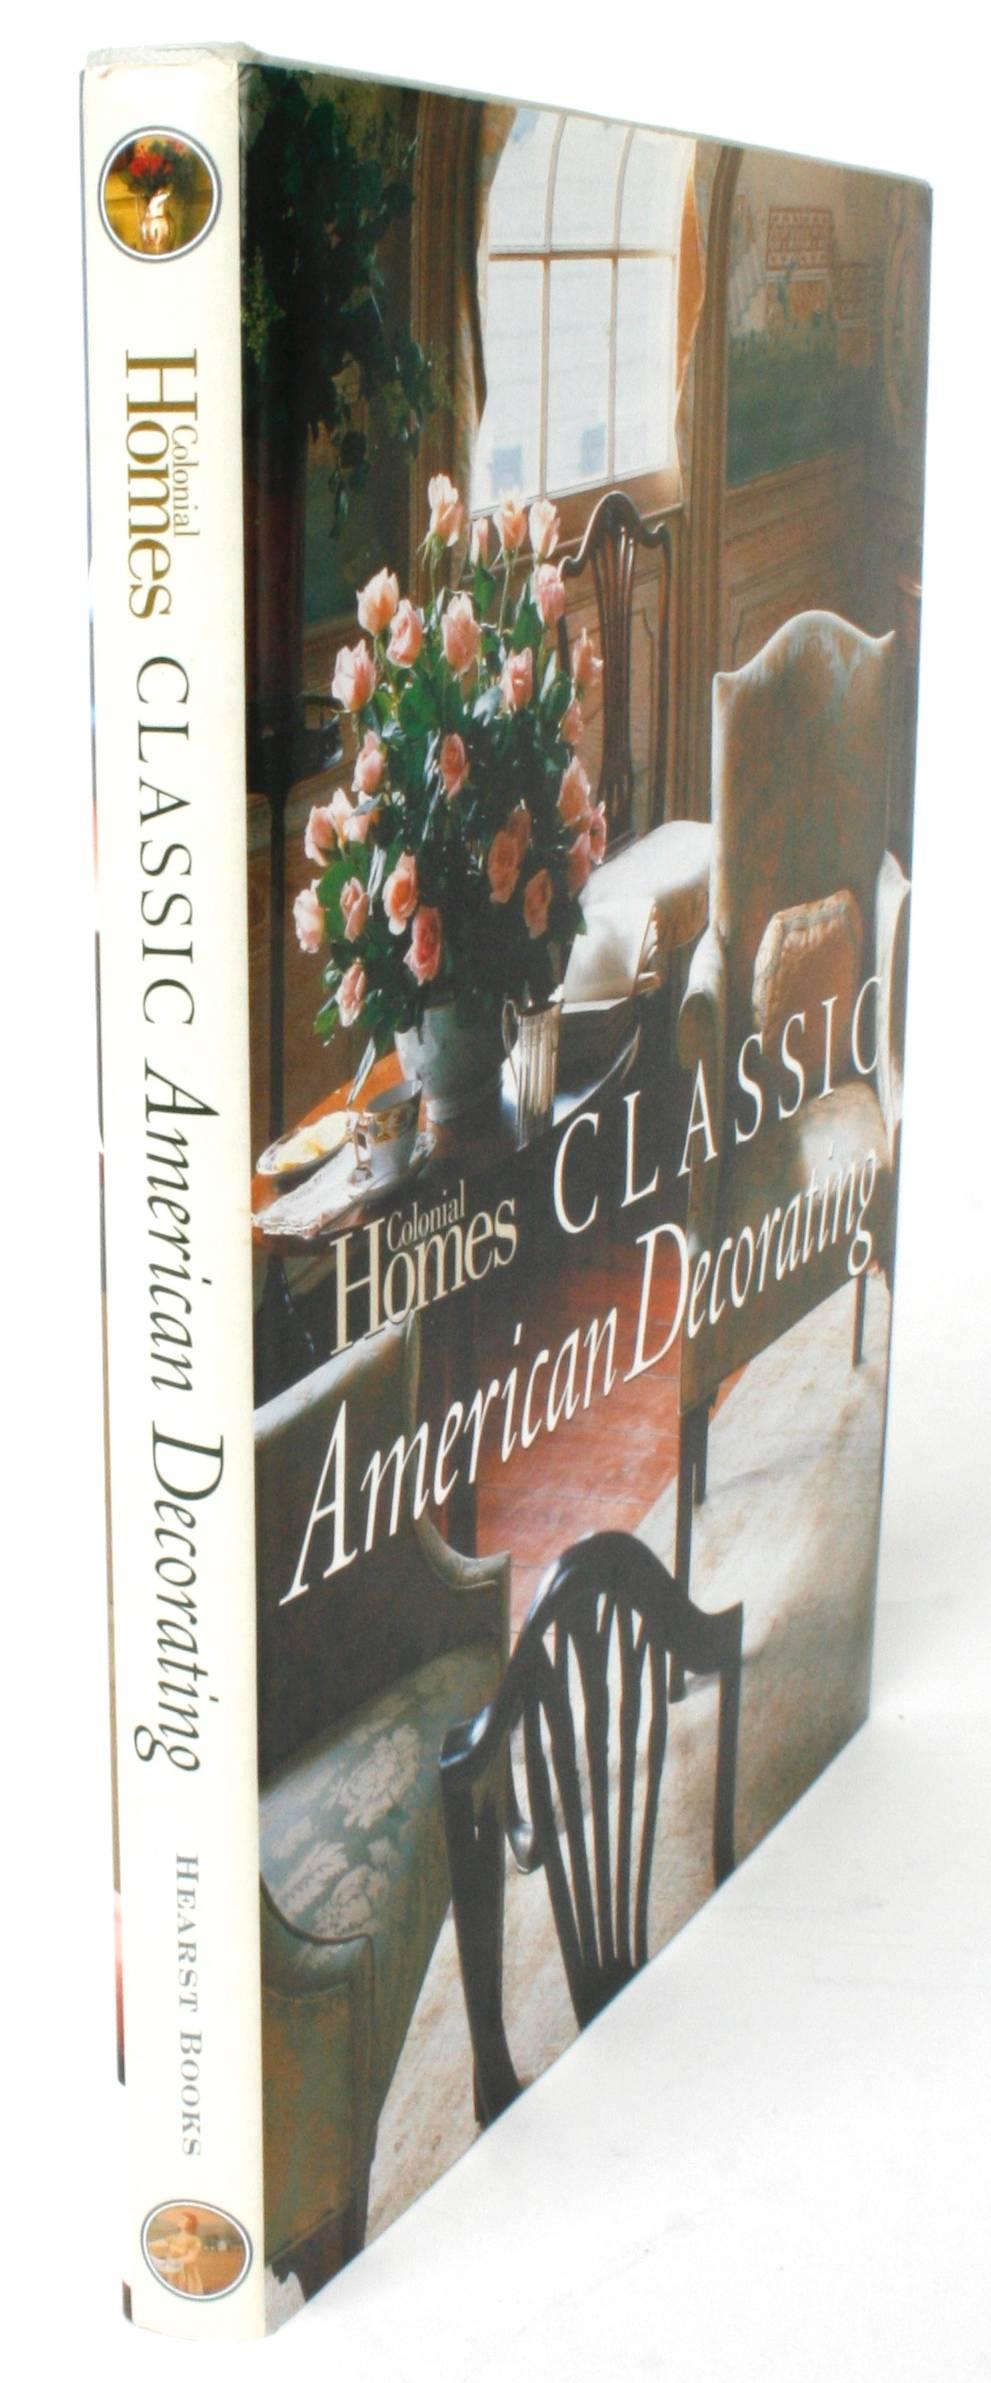 Classic American Decorating by Colonial Homes. NY: Hearst Books. Stated first edition hardcover with dust jacket. 192 pp. A book on the classical decorating of American homes. Some of the interiors have traditional furnishings, while others show an